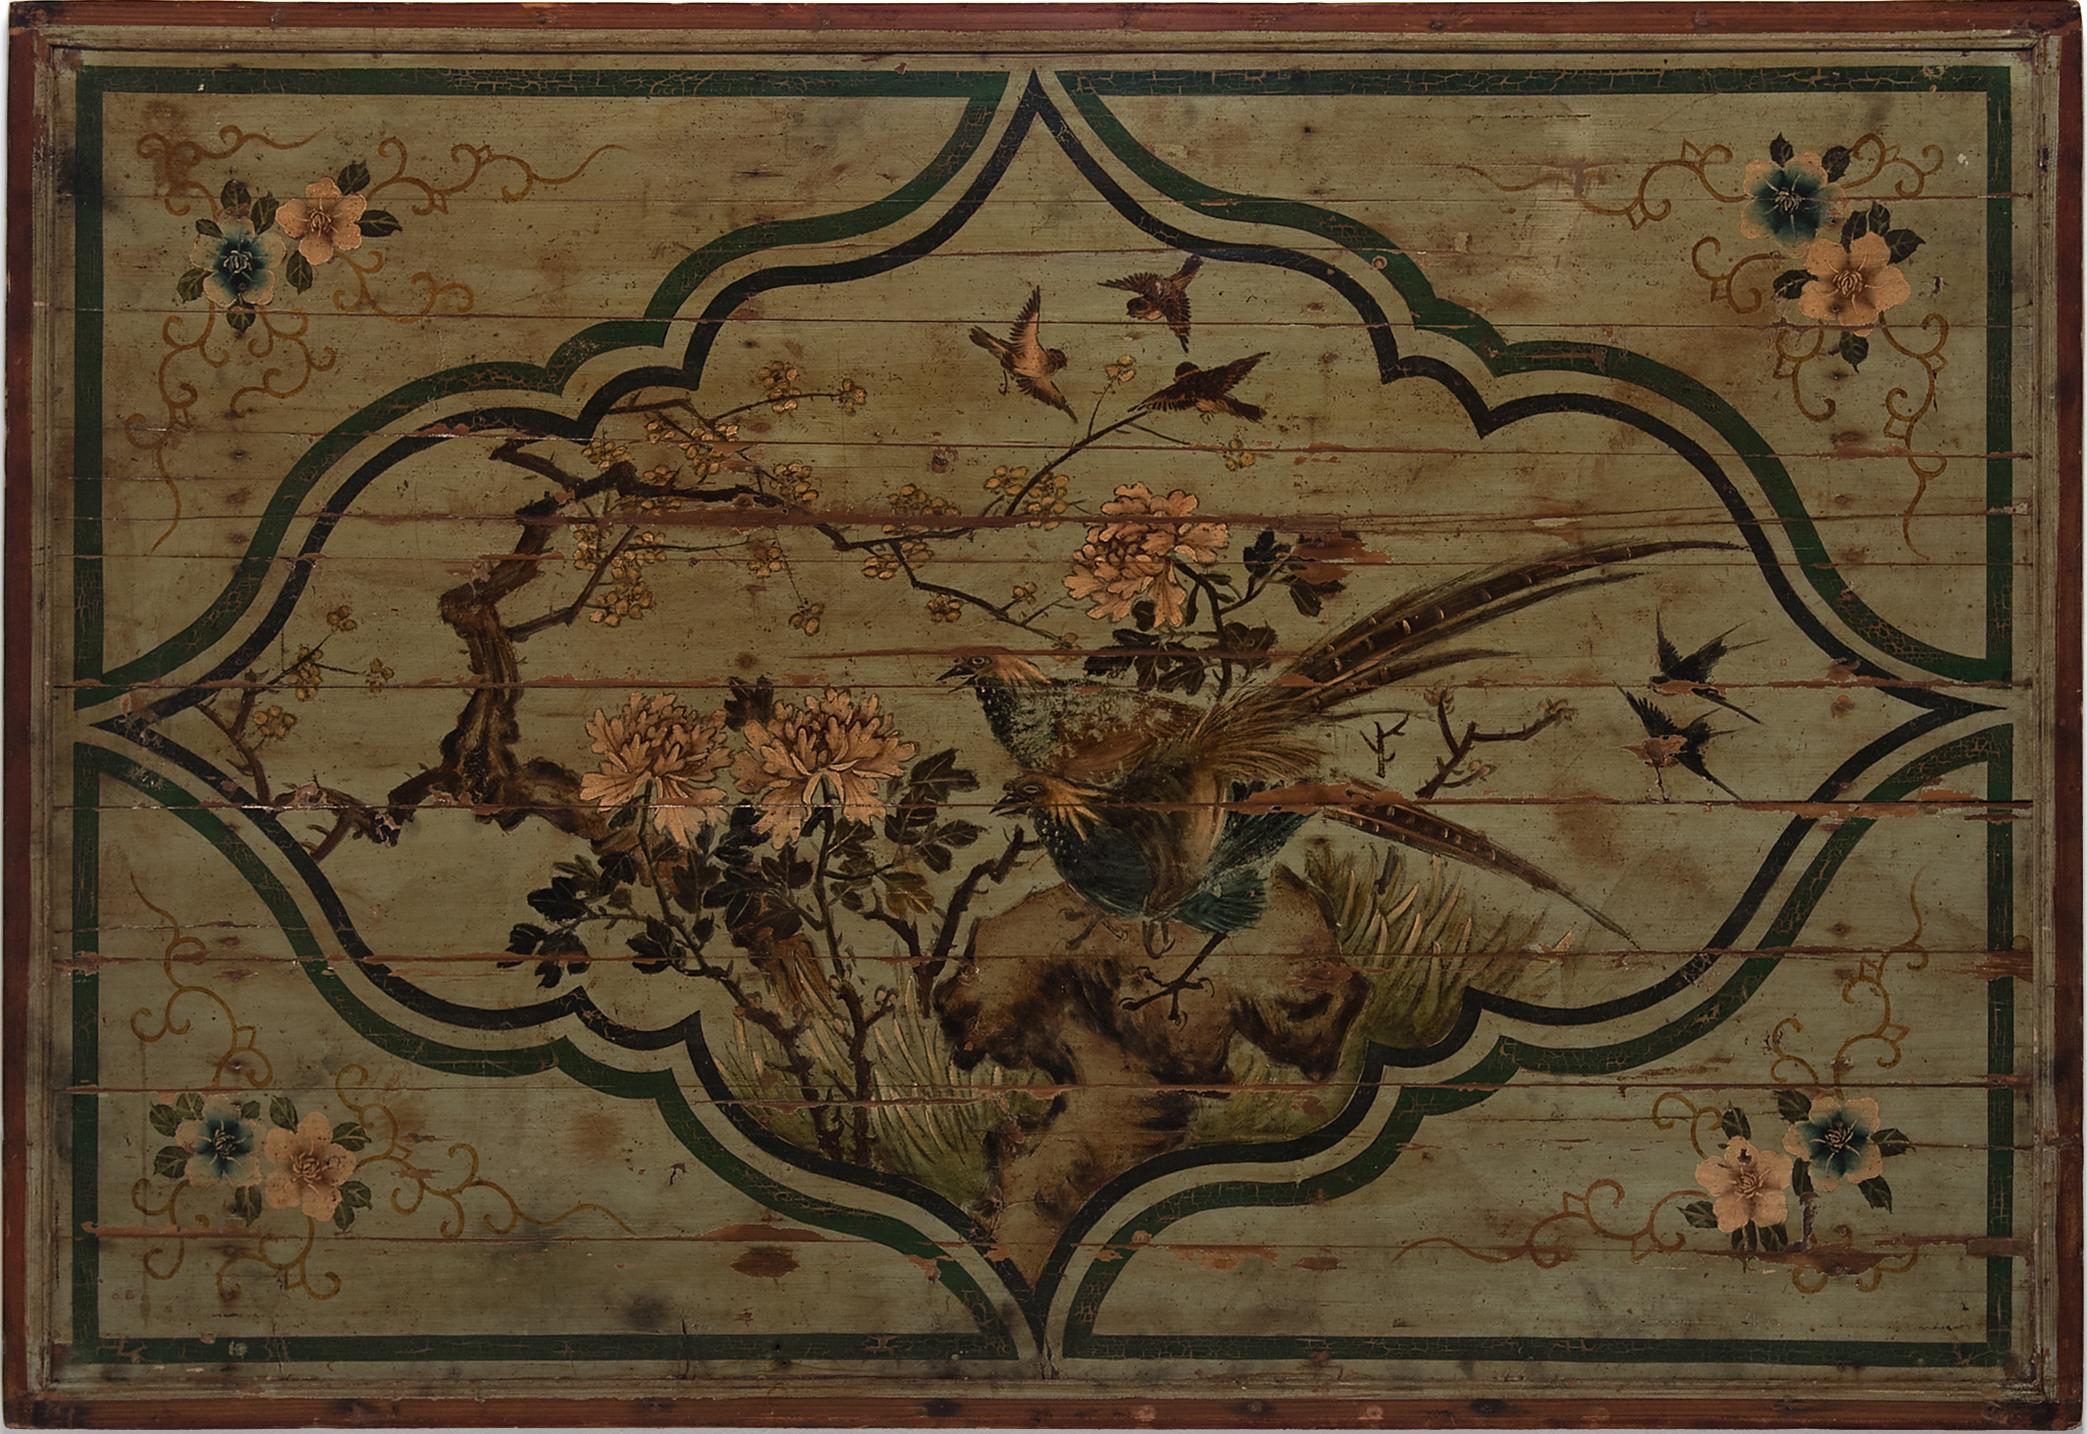 Chinese Bed Canopy Painting of Peonies and Pheasants, c. 1850